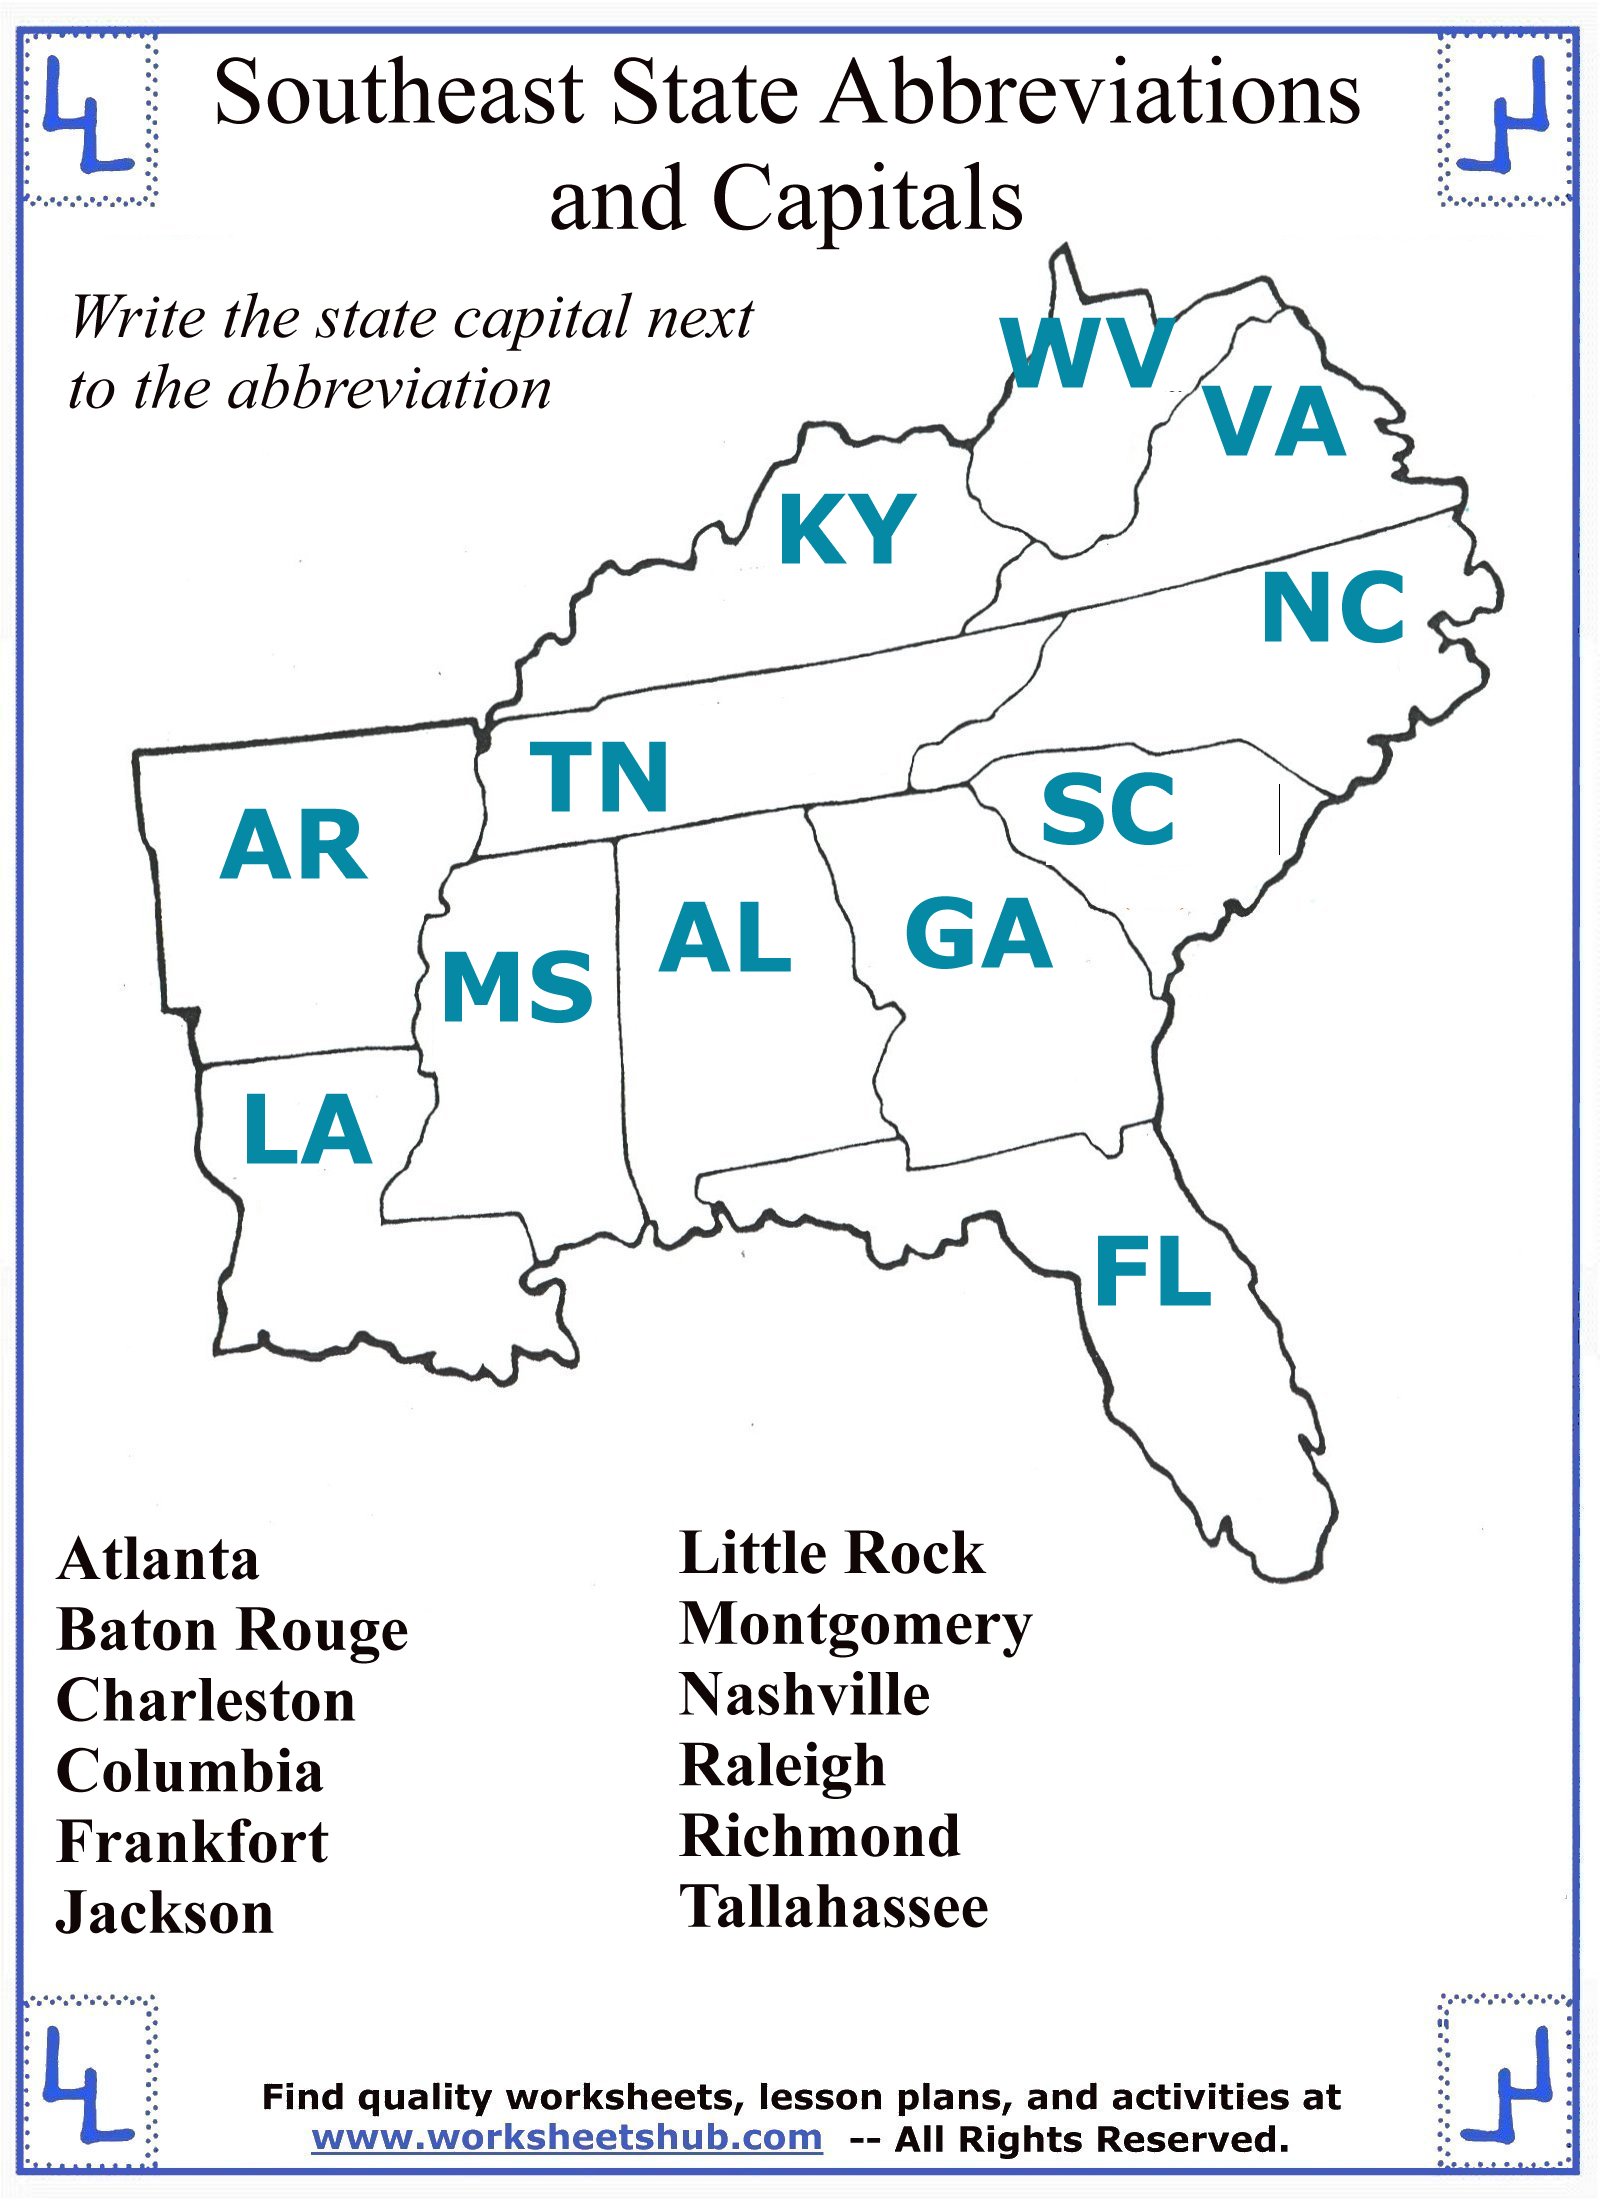 southeast-states-and-capitals-quiz-printable